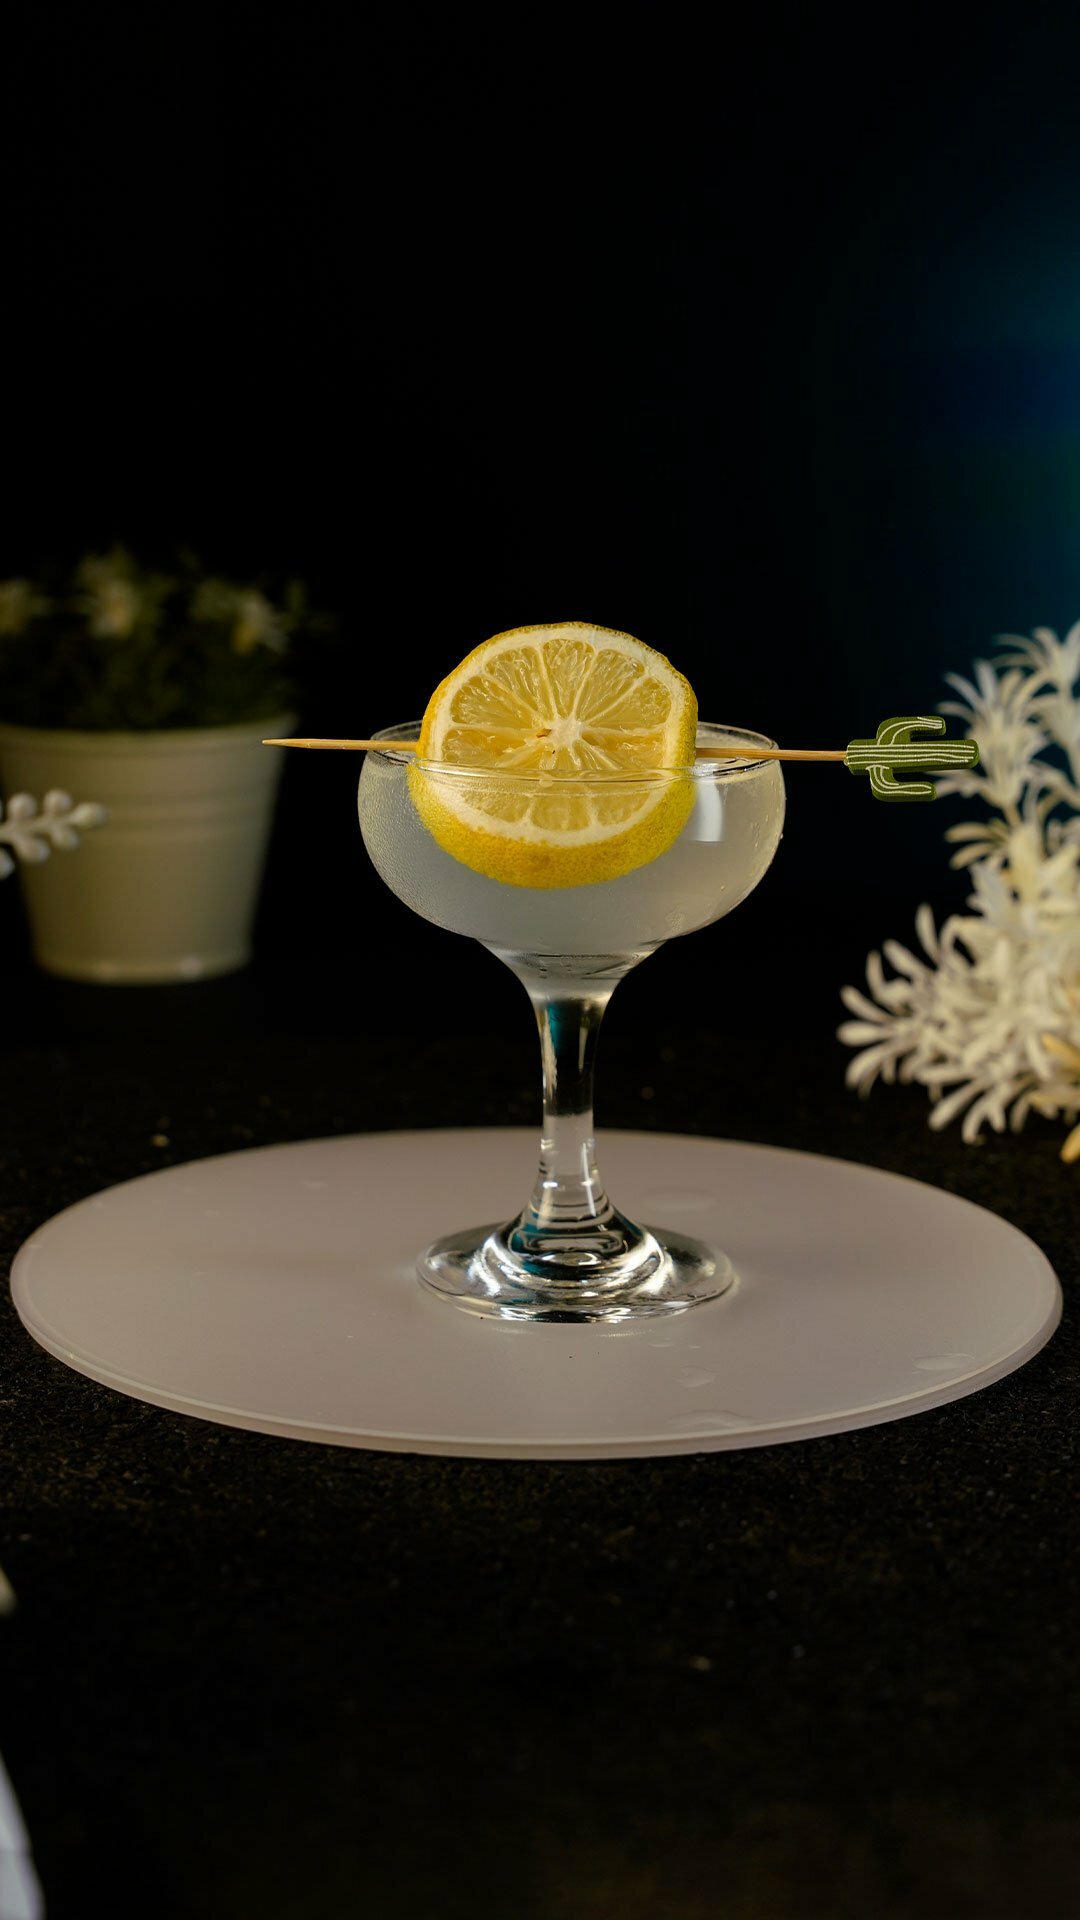 Gin cocktail served in a small coupe glass garnished with a lemon wheel on a cocktail pick